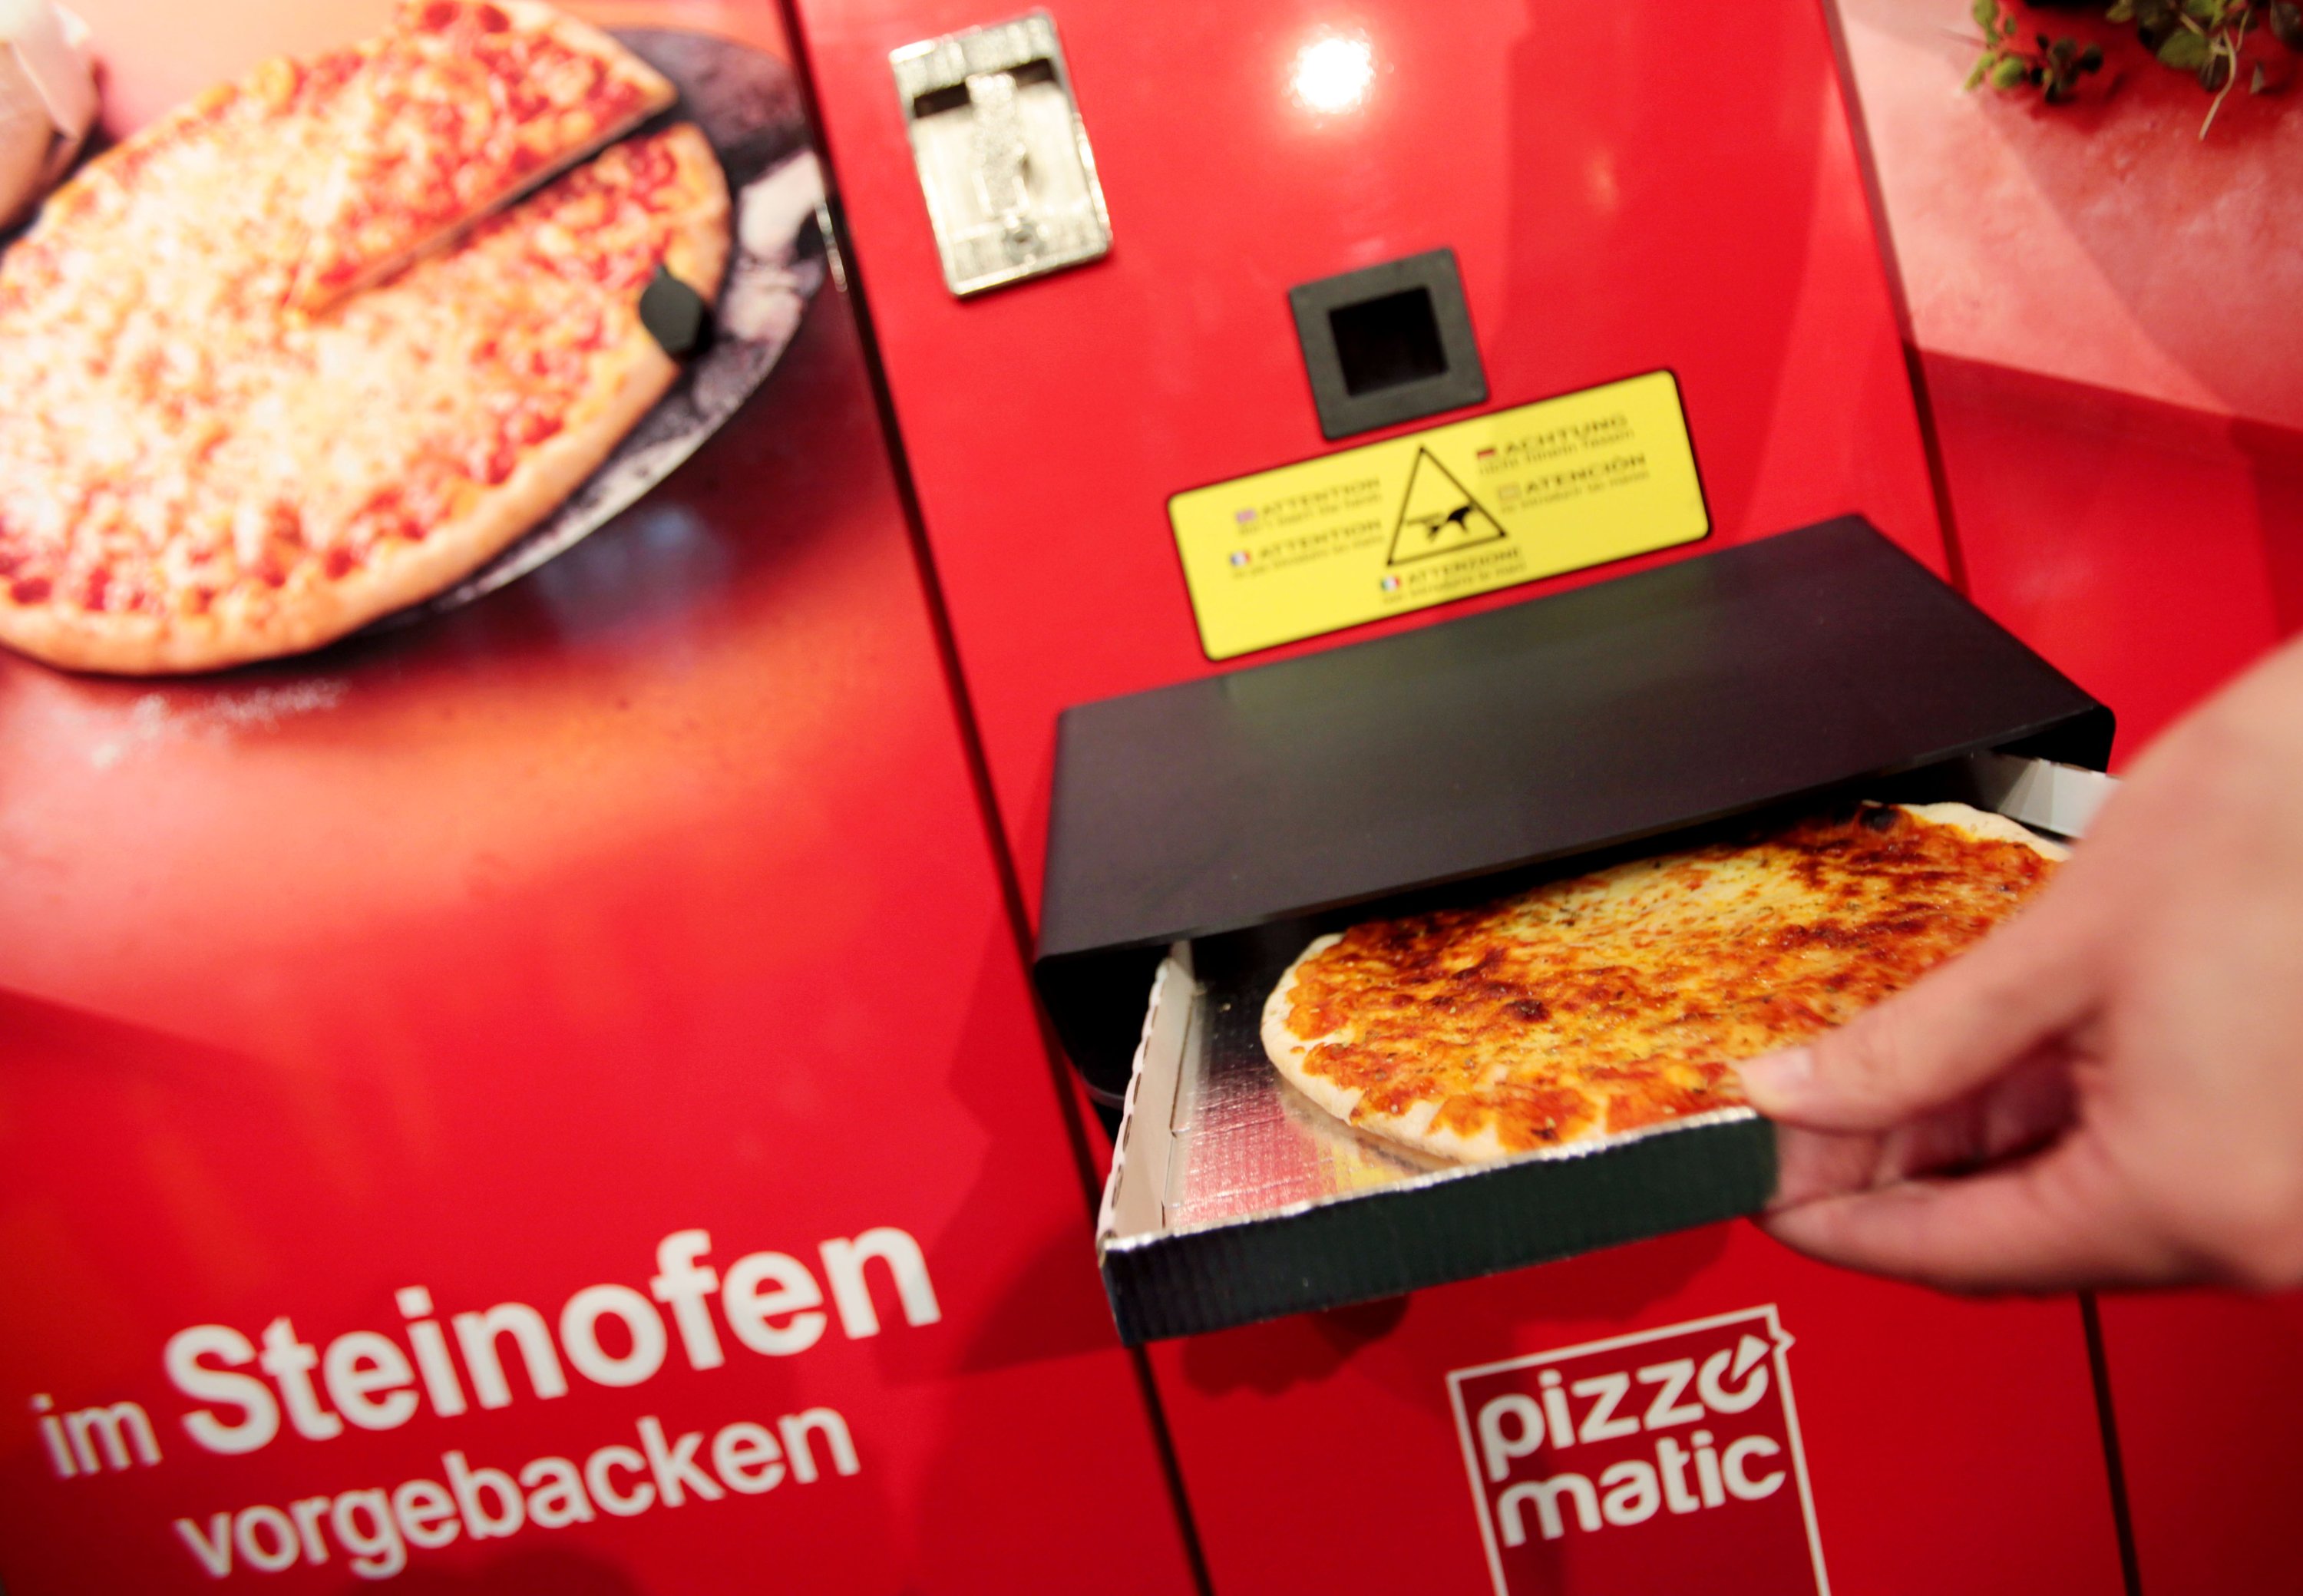 Pizza, Burrito, and Sushi Vending Machines Are the New Fast Food Trend